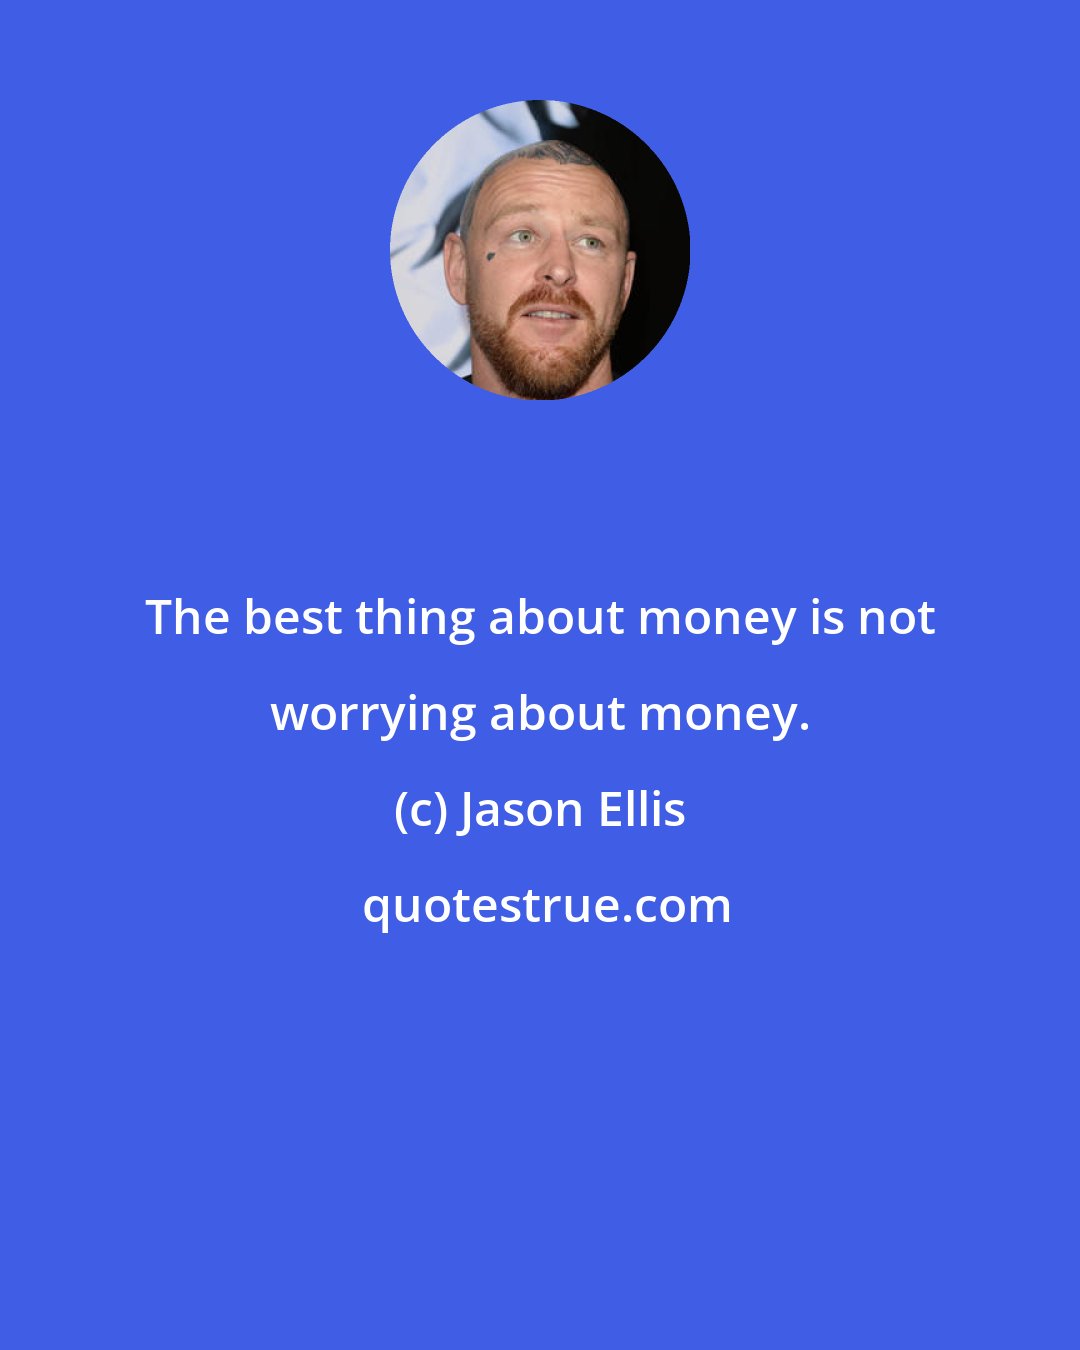 Jason Ellis: The best thing about money is not worrying about money.